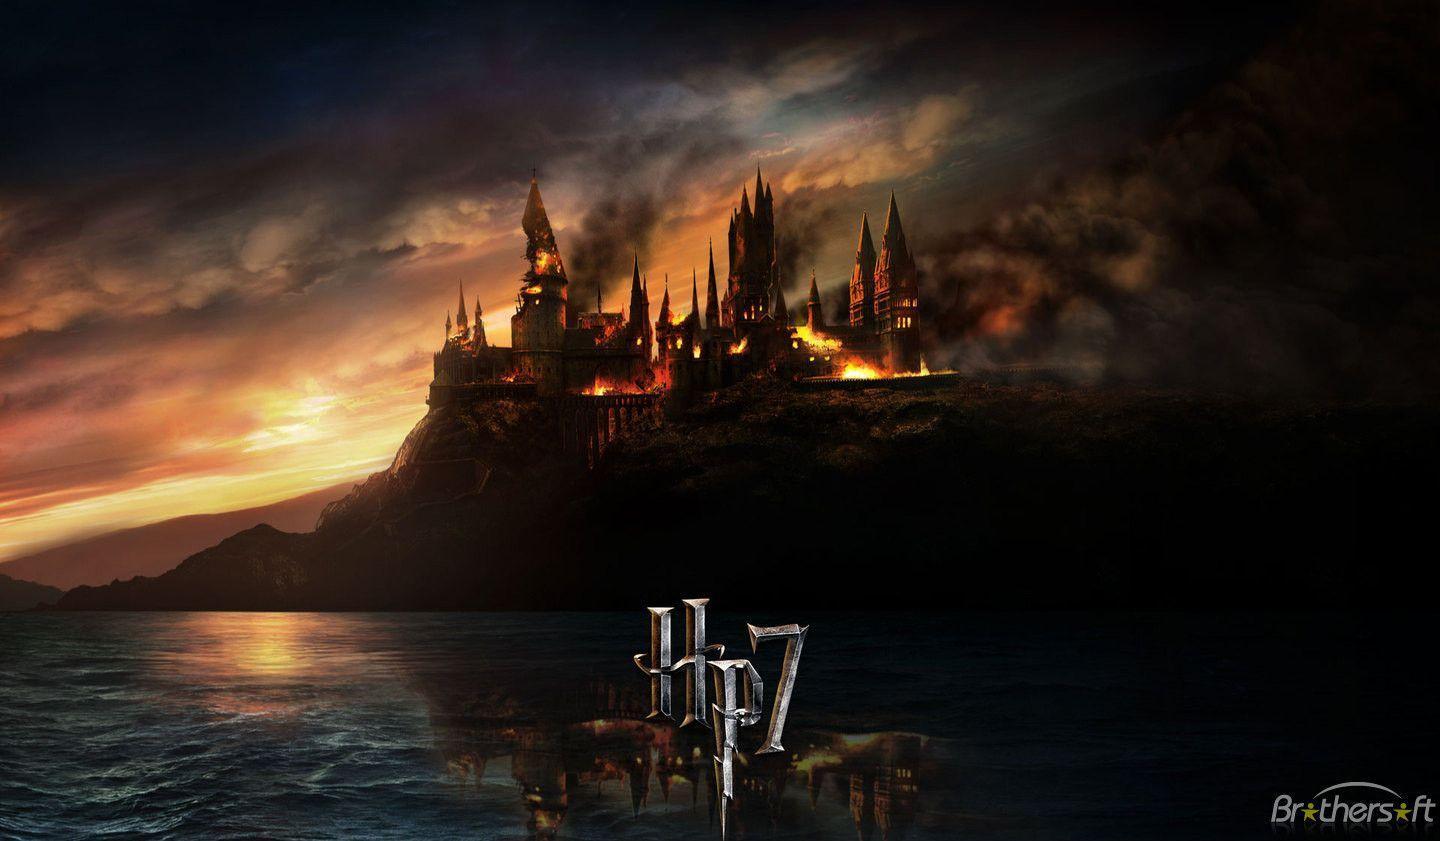 Download Free The Disaster for Hogwarts wallpaper, The Disaster